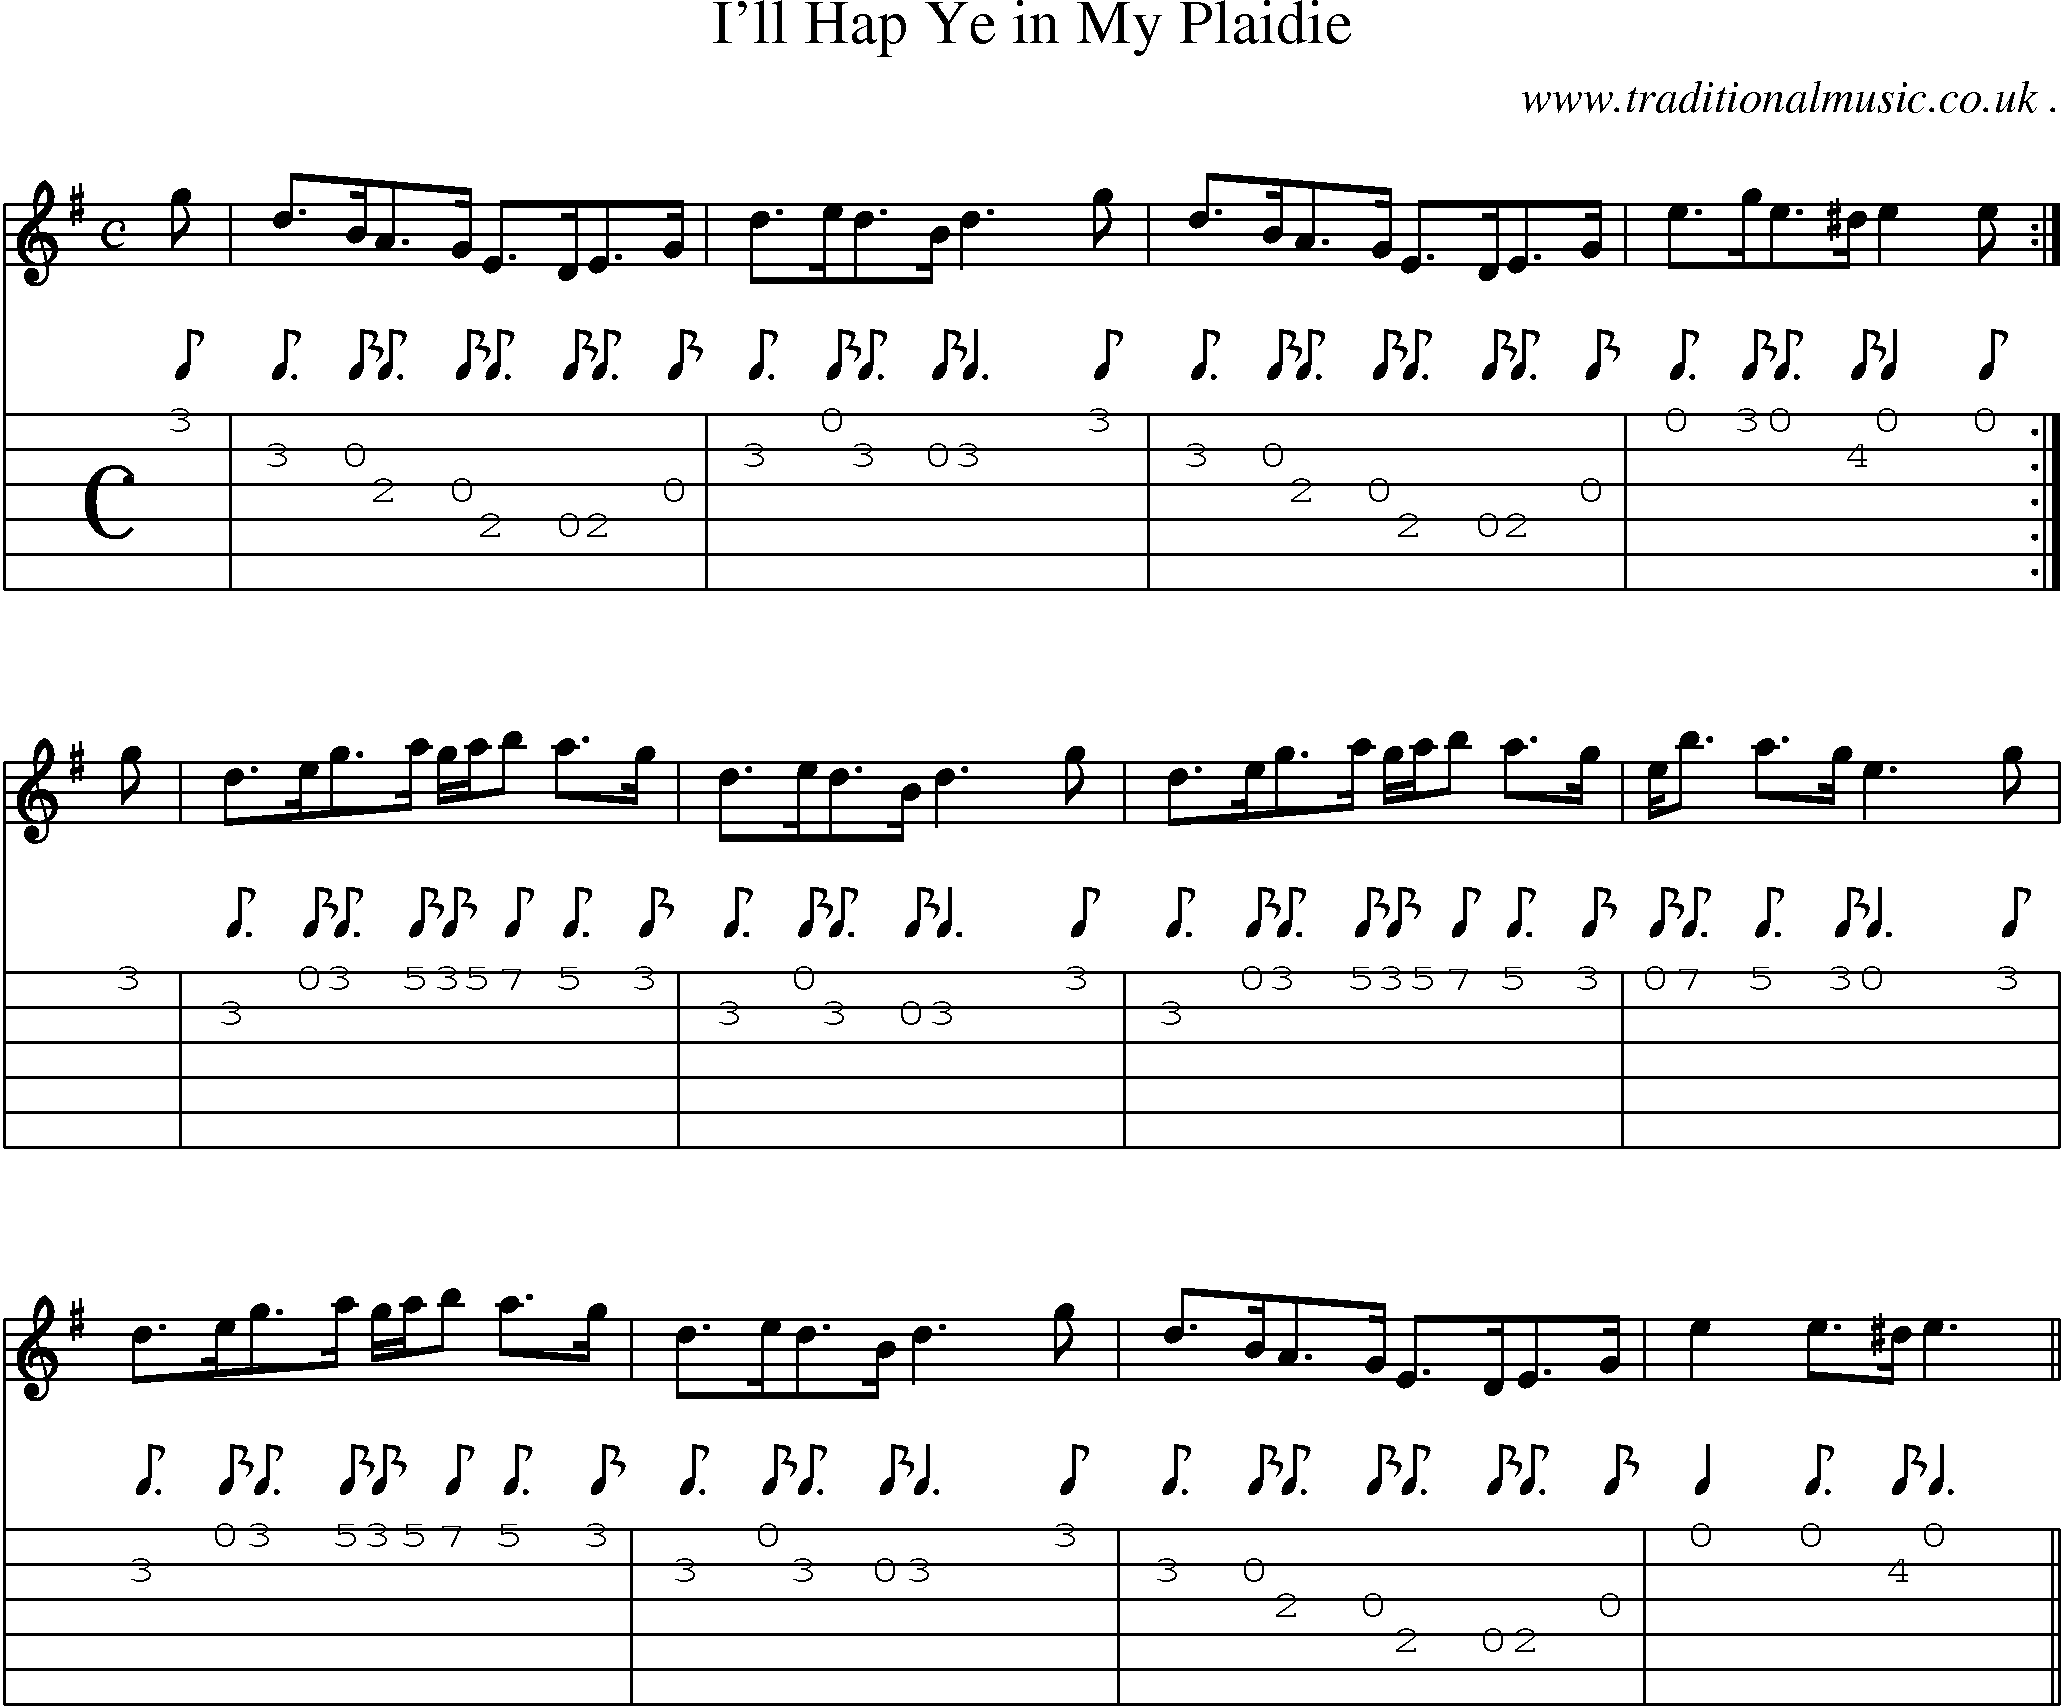 Sheet-music  score, Chords and Guitar Tabs for Ill Hap Ye In My Plaidie